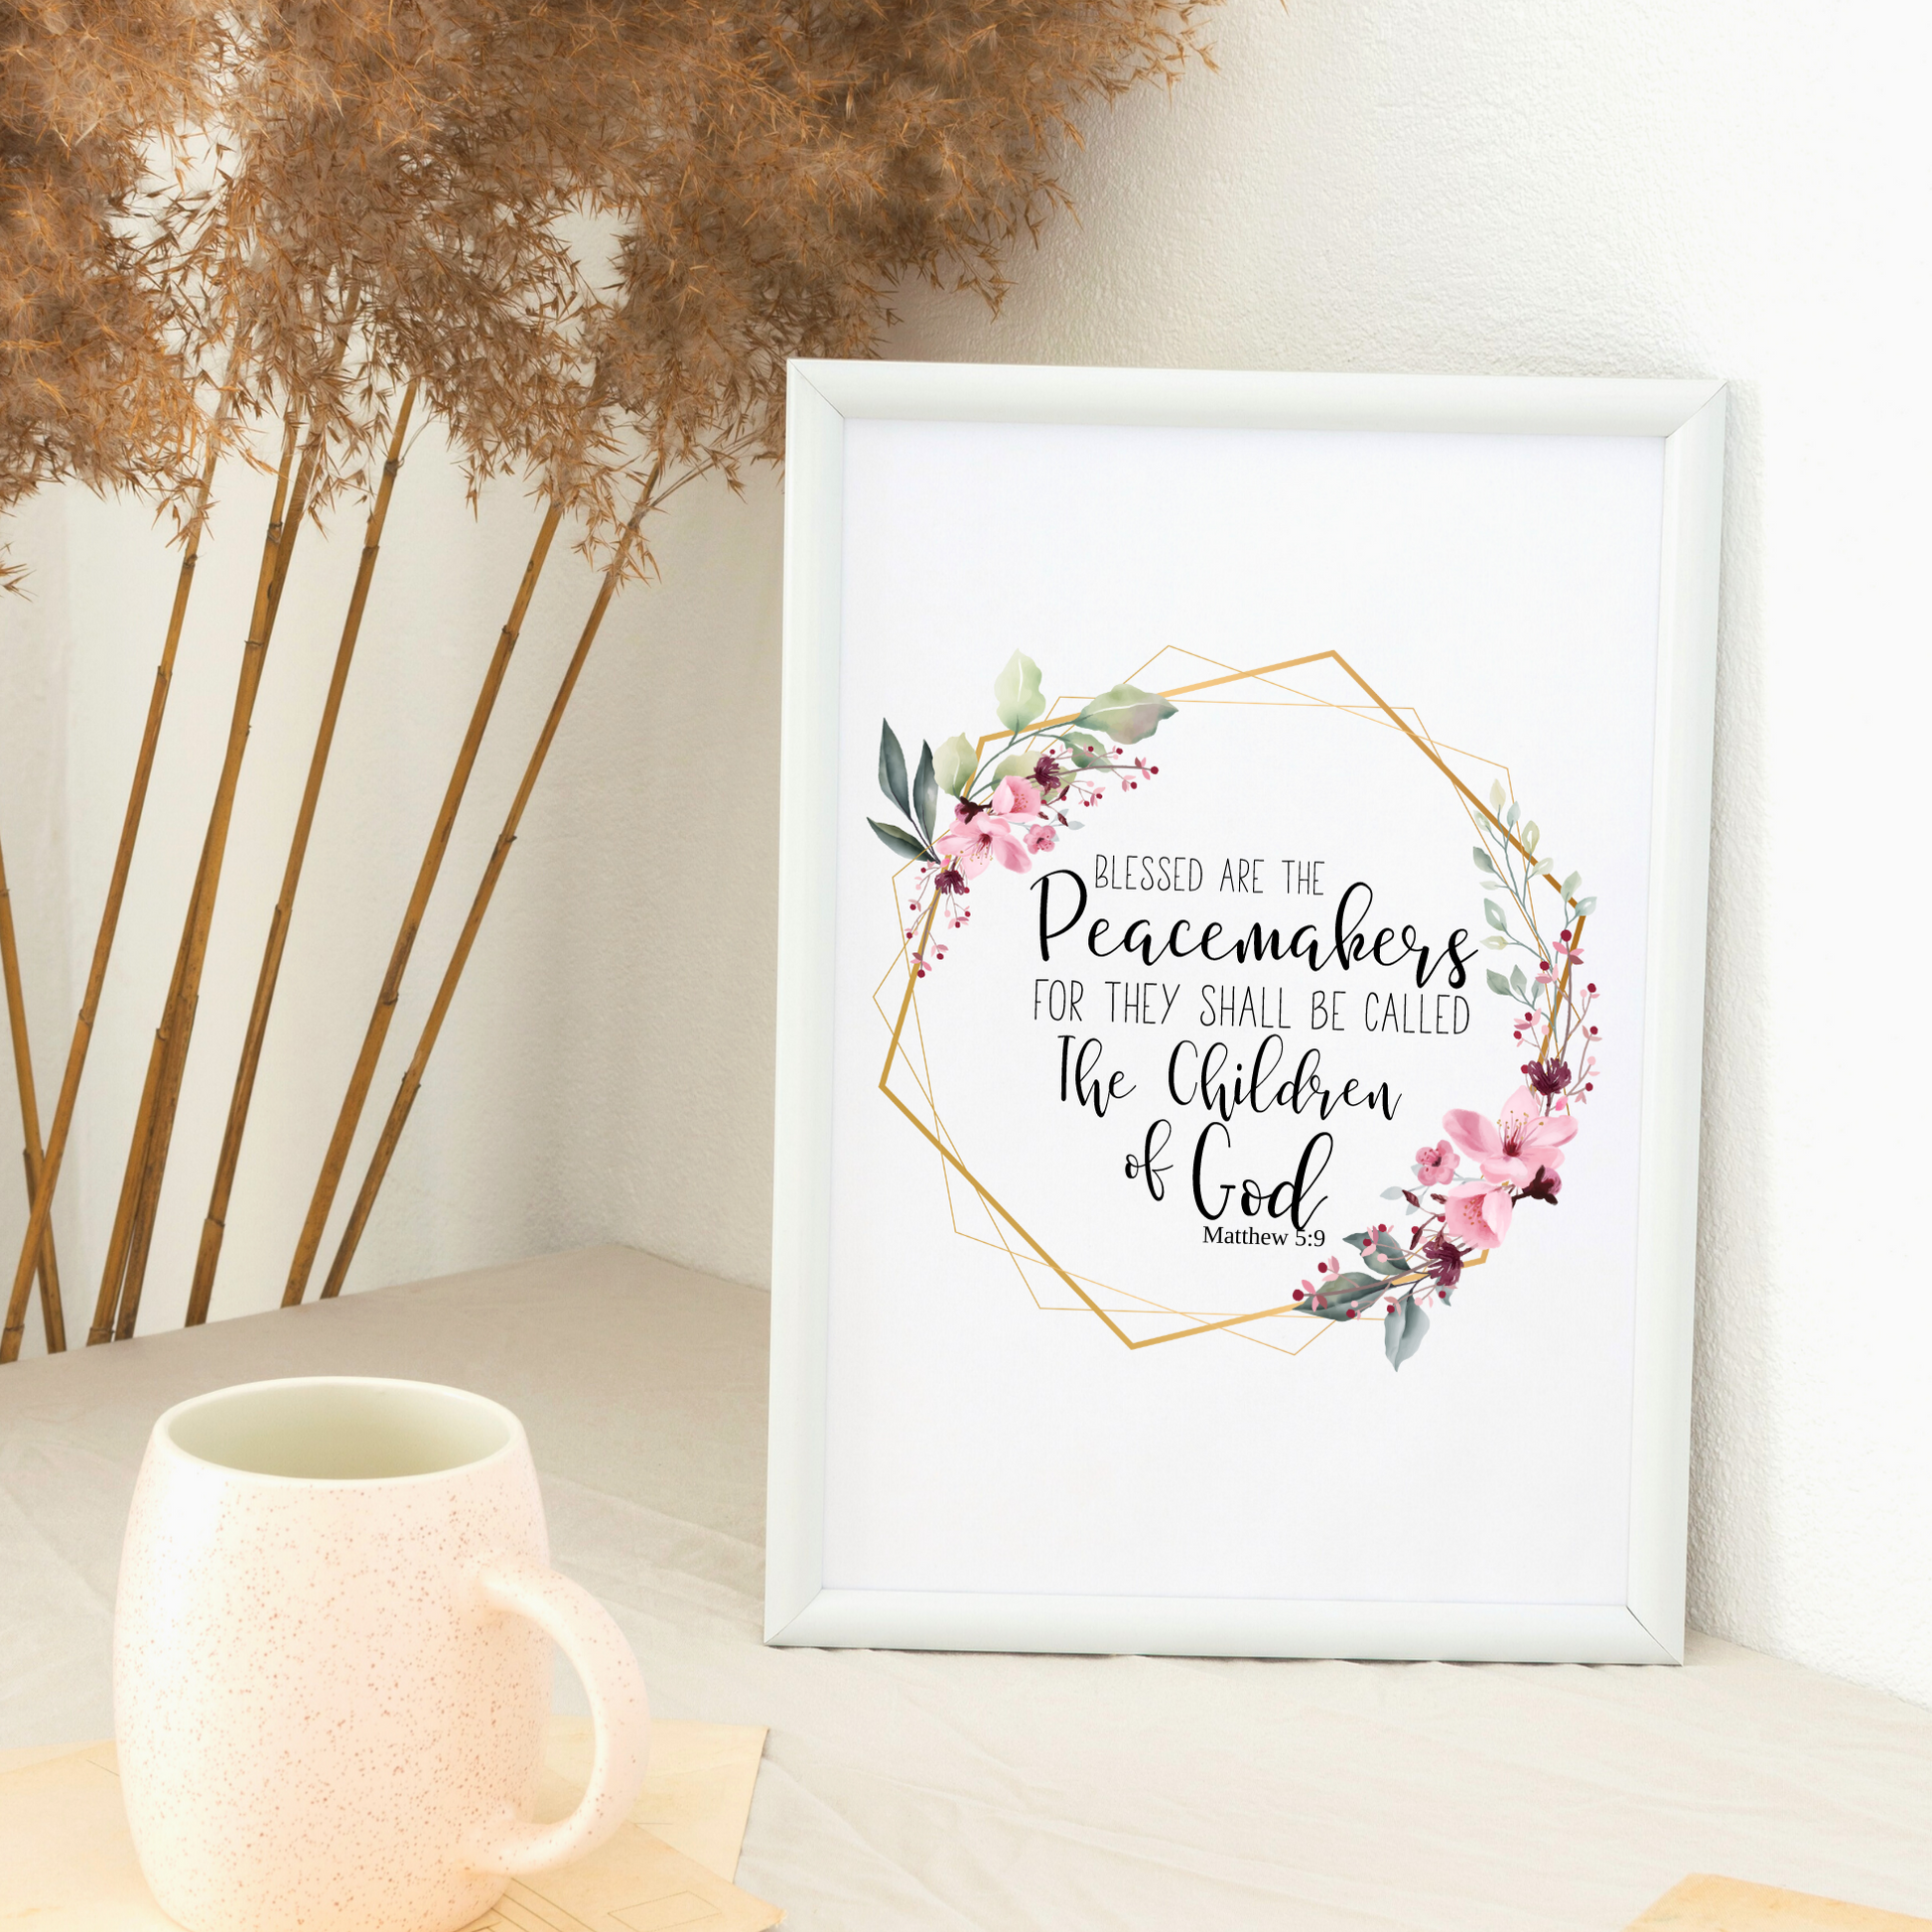 White frame sitting on a table with a white coffee cup sitting next to the frame and Pompas grass behind the table. Print in the frame displays a quote from Matthew 5:9 KJV that says Blessed are the peacemakers for they shall be called the Children of God. the quote is surrounded by a gold  geometric frame with pink flowers and greenery. 